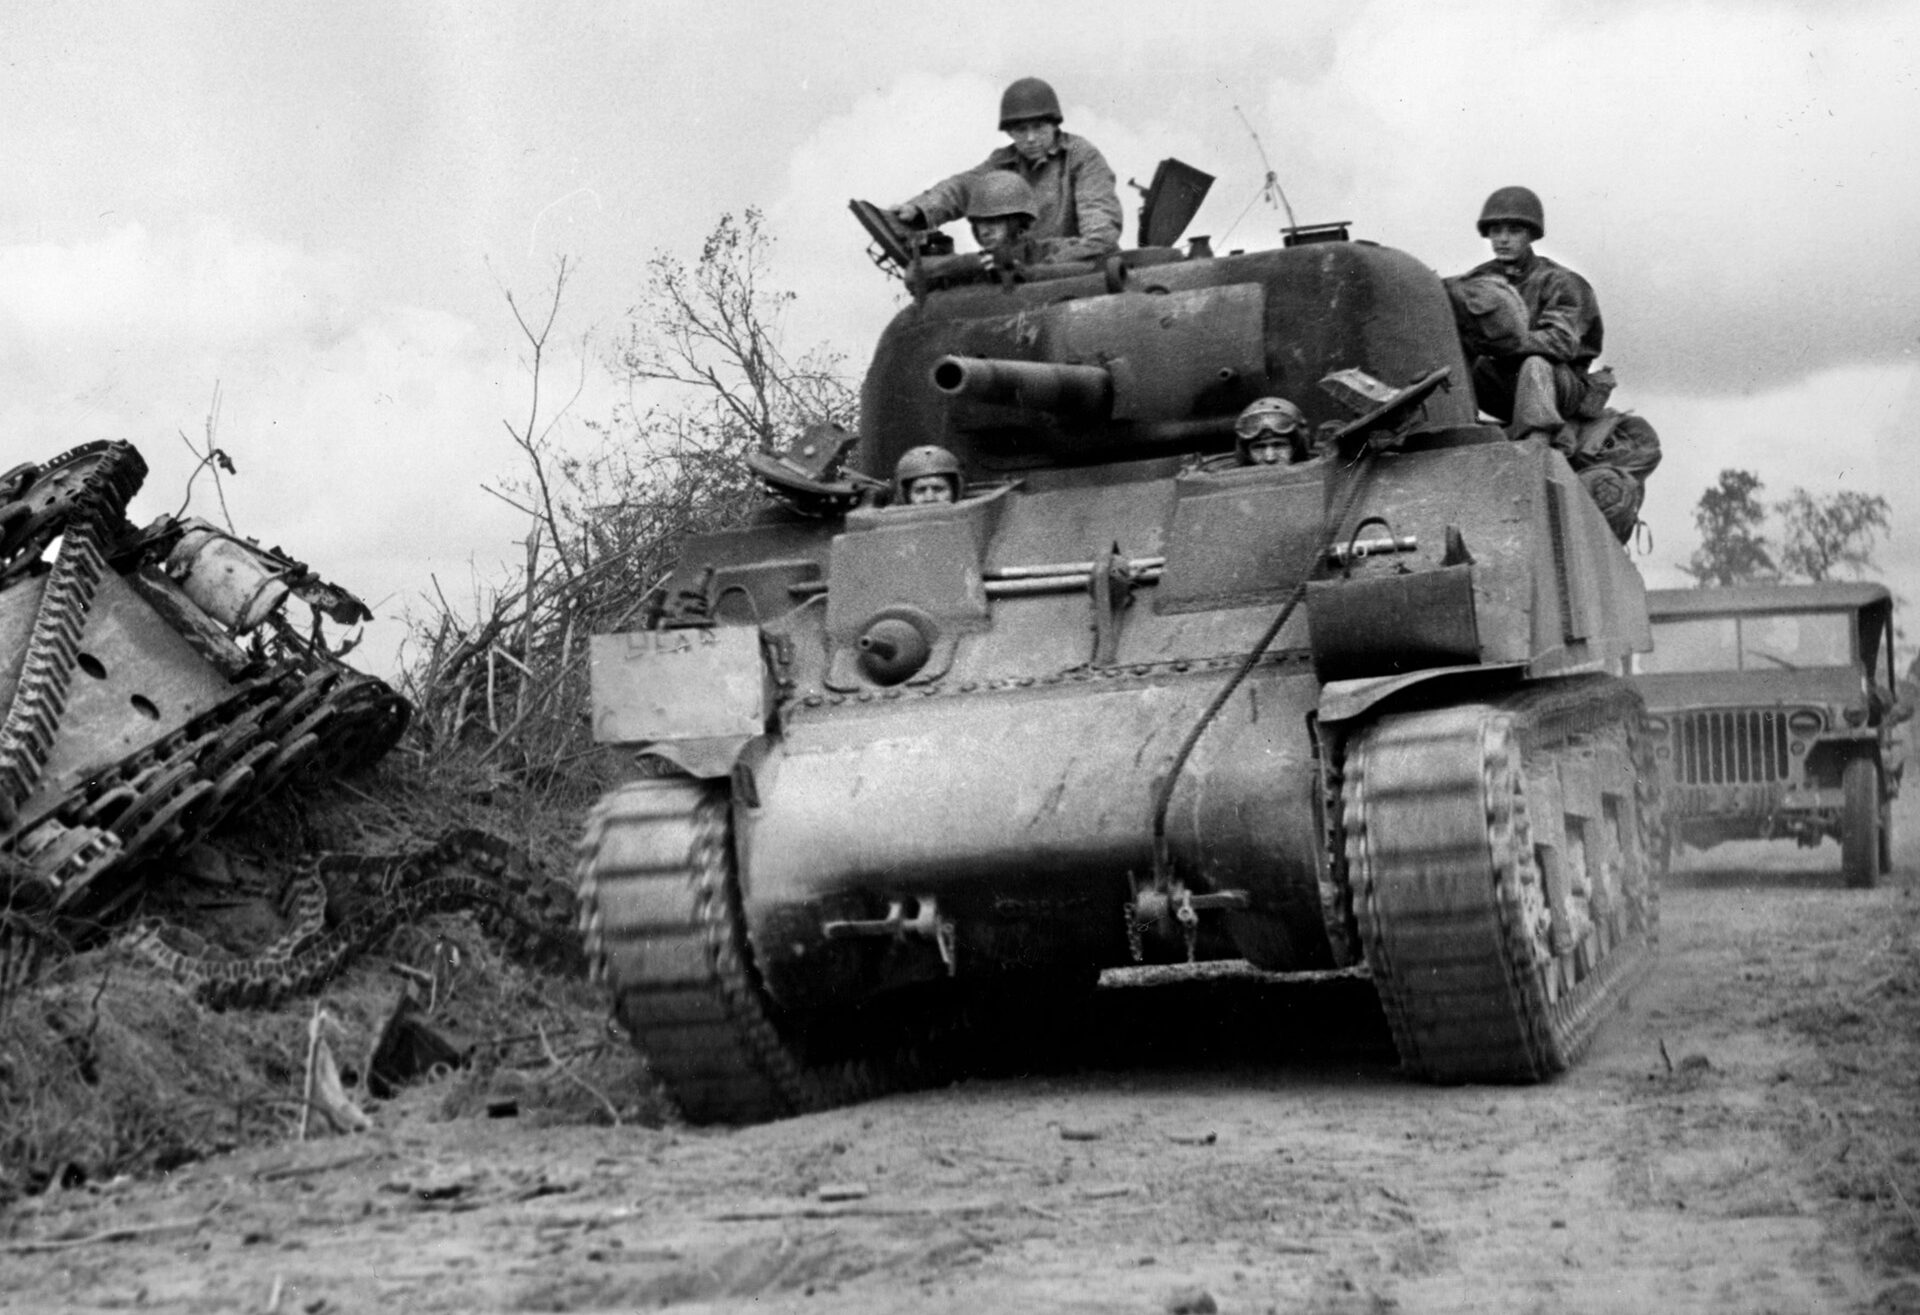 An American Sherman tank sweeps past an upended panzer on a country lane in Normandy. German armored forces suffered huge losses during Cobra.